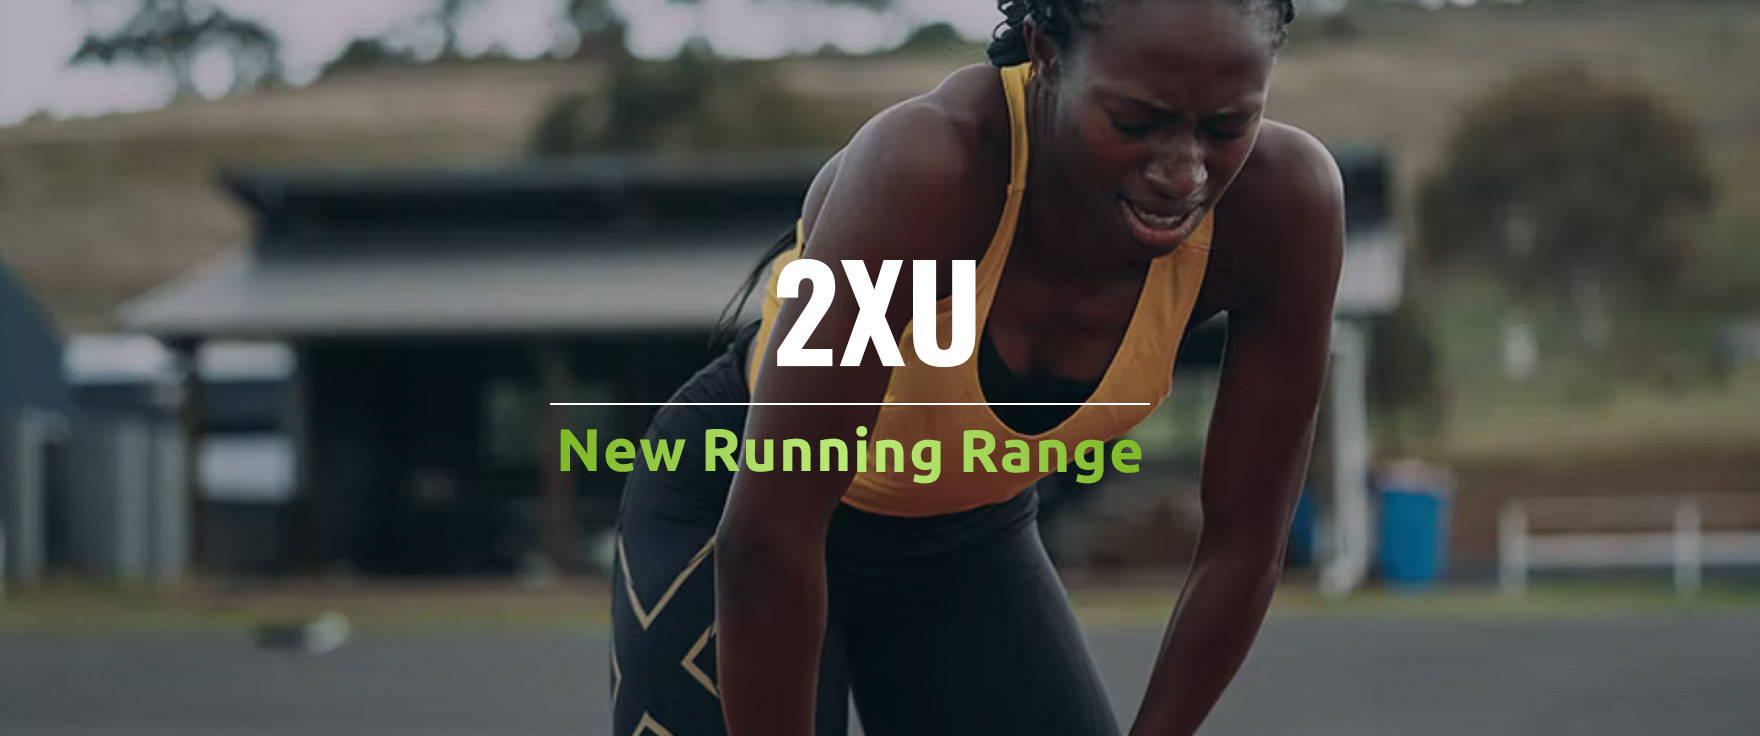 Push your limits with the latest 2XU running range!